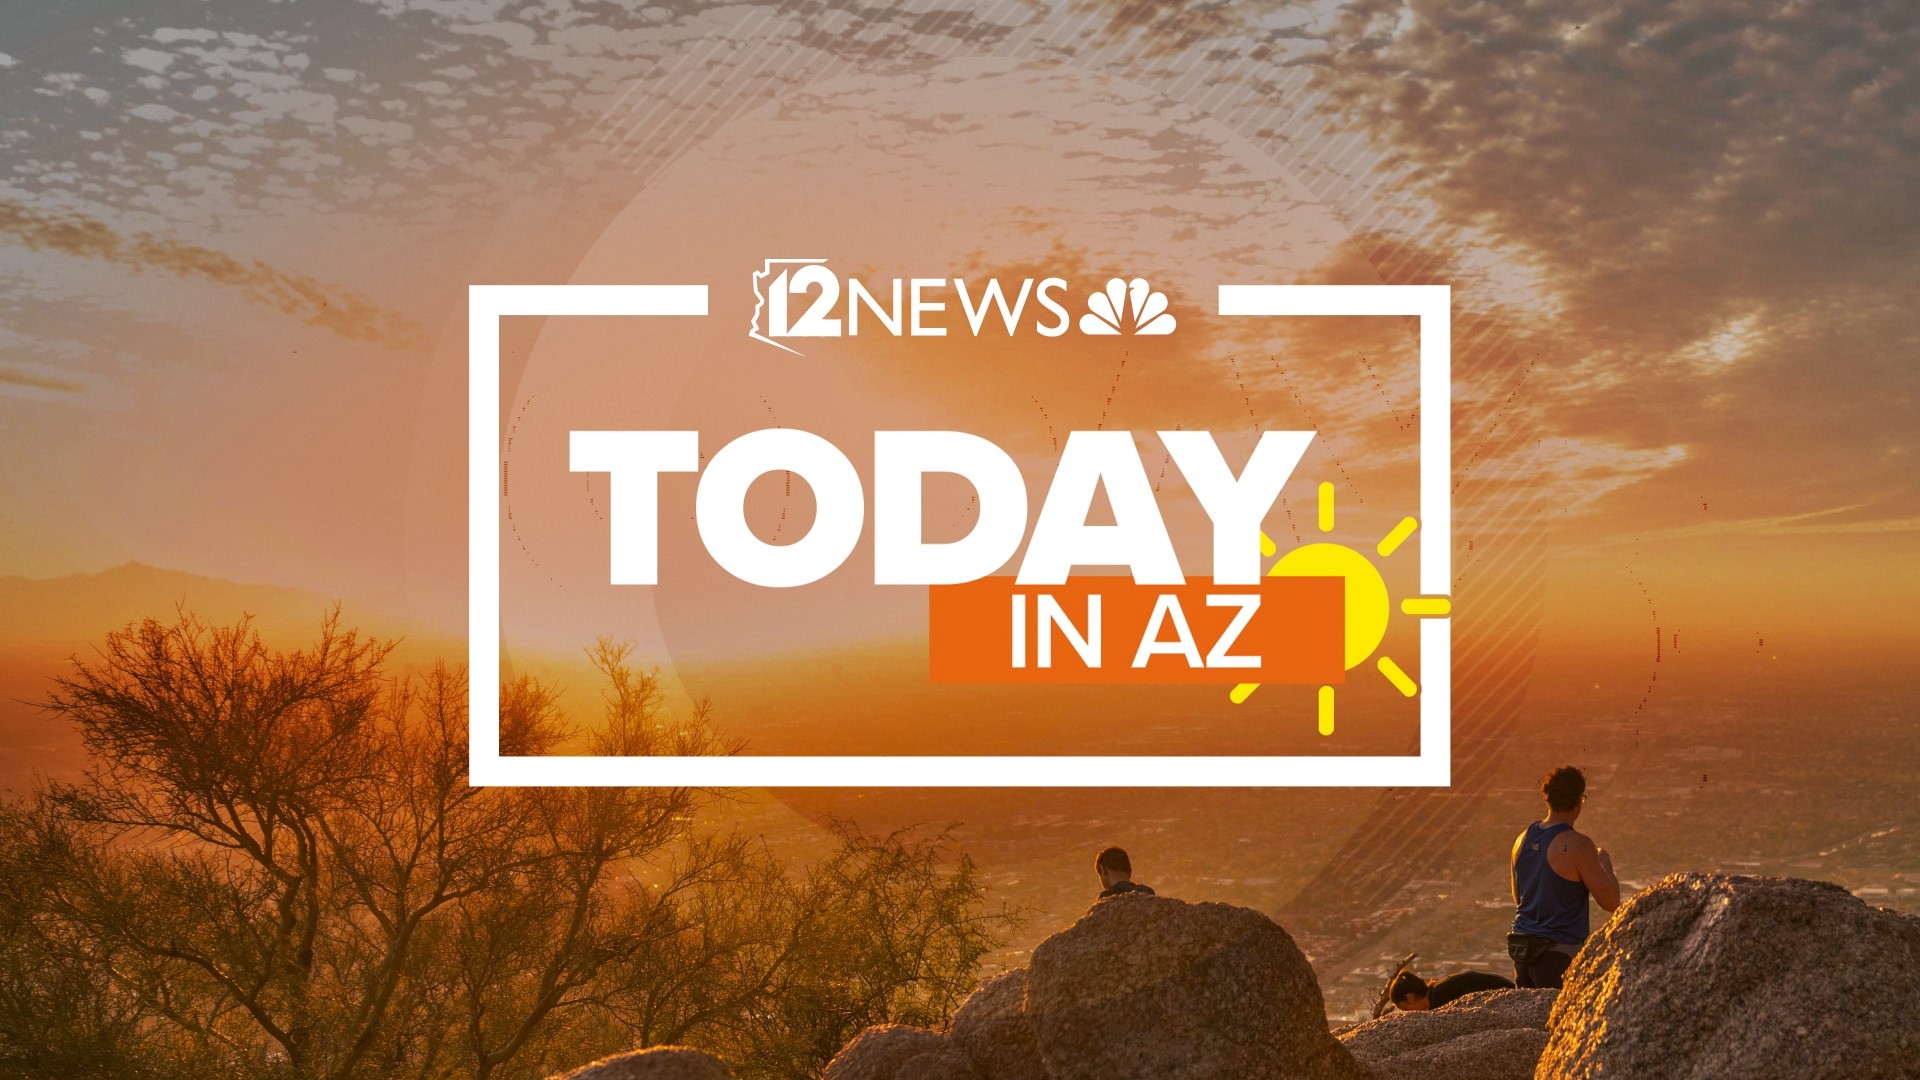 Get the latest local and national headlines from 12News.